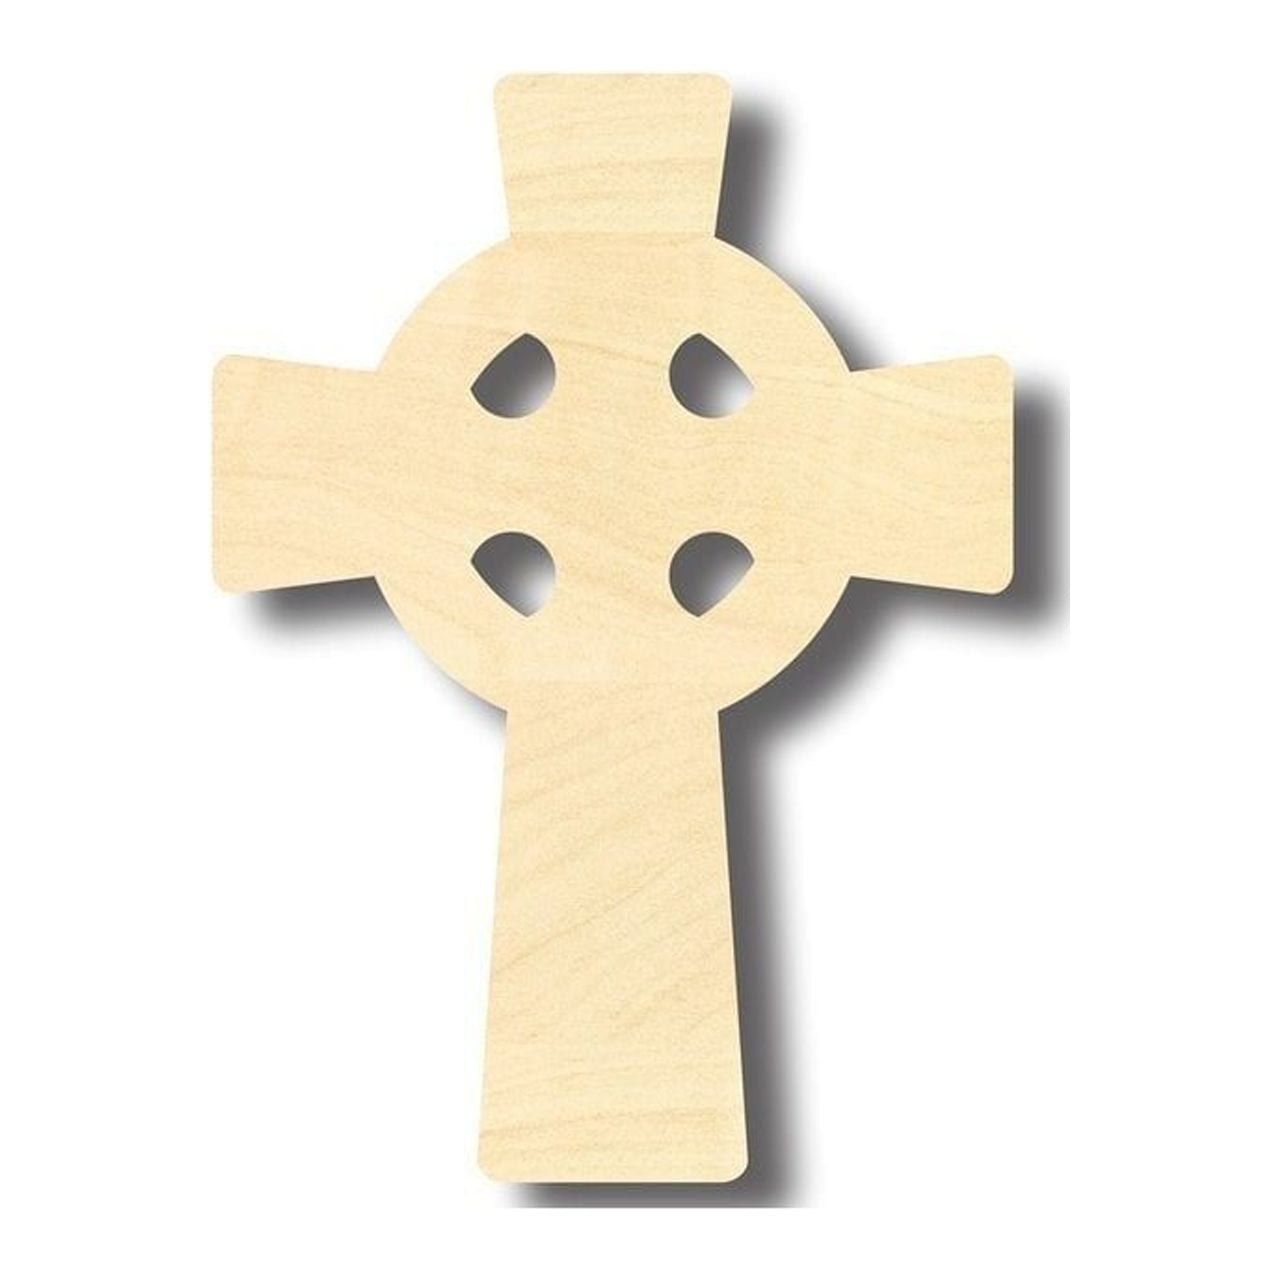 Unfinished Wooden Crosses - Sanded Blank Crosses for Painting and Crafting  | 12 Pack